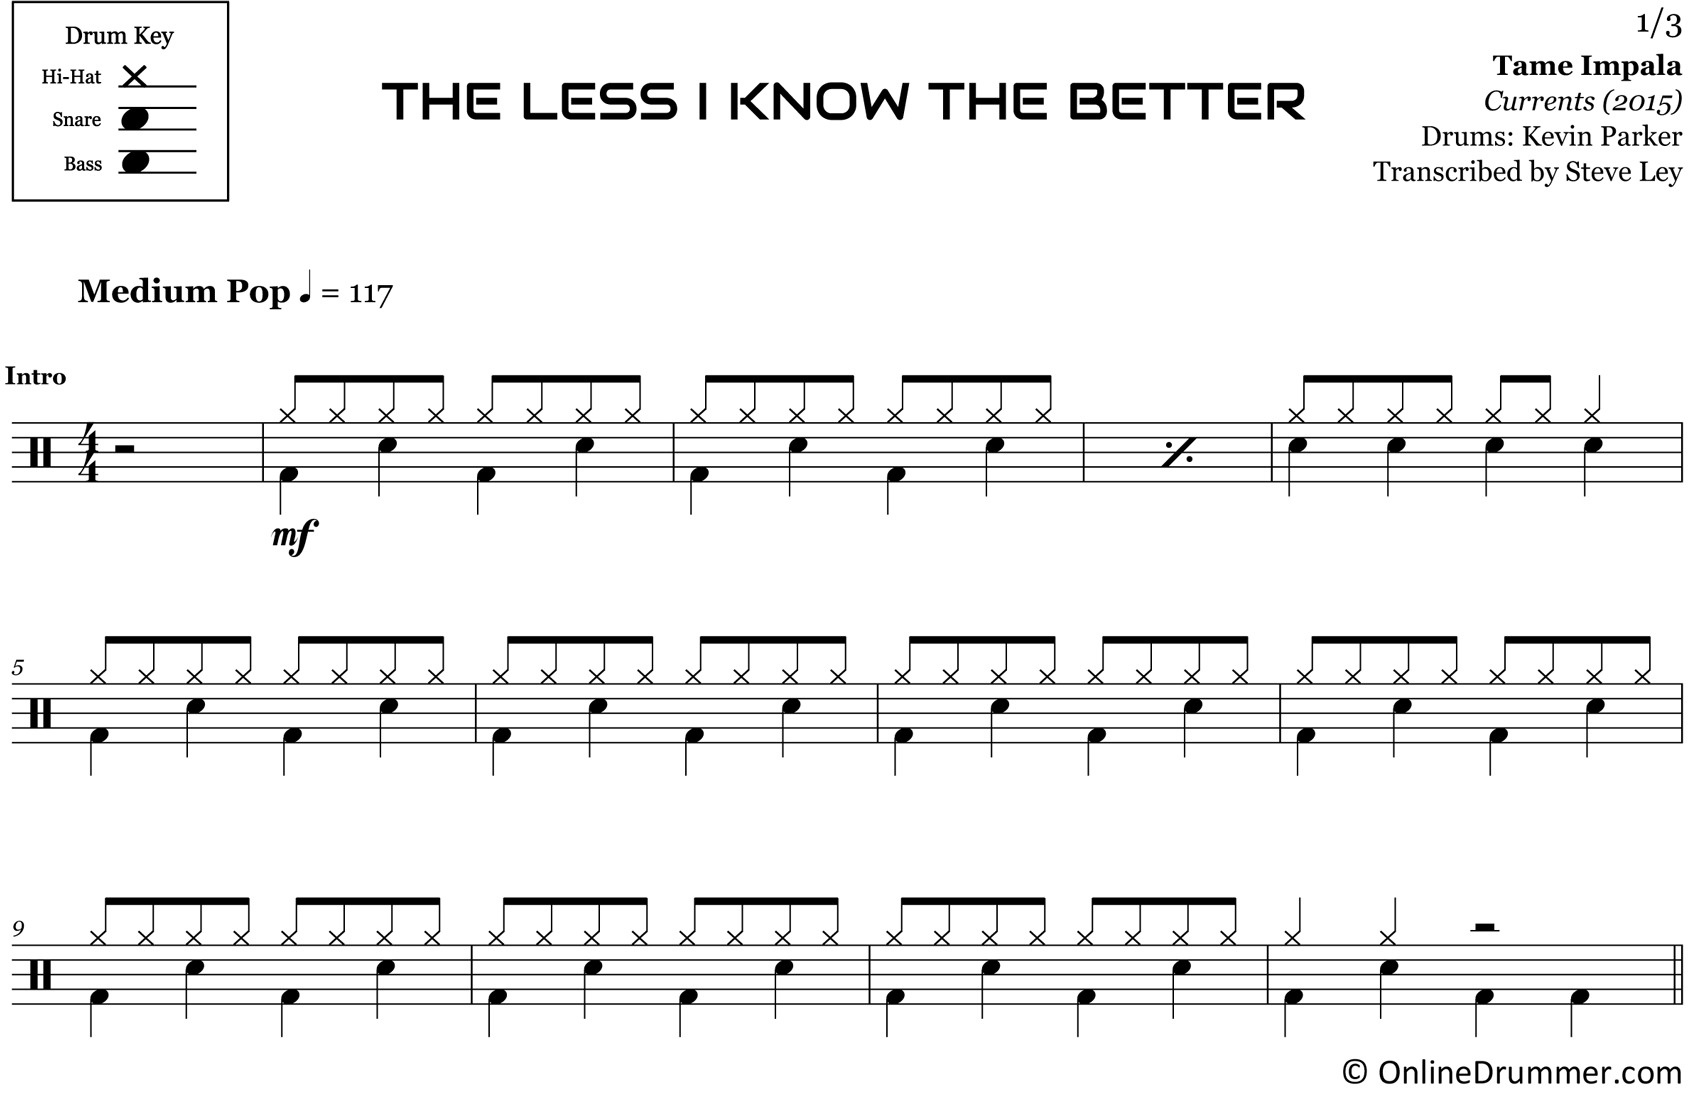 The Less I Know the Better - Tame Impala - Drum Sheet Music